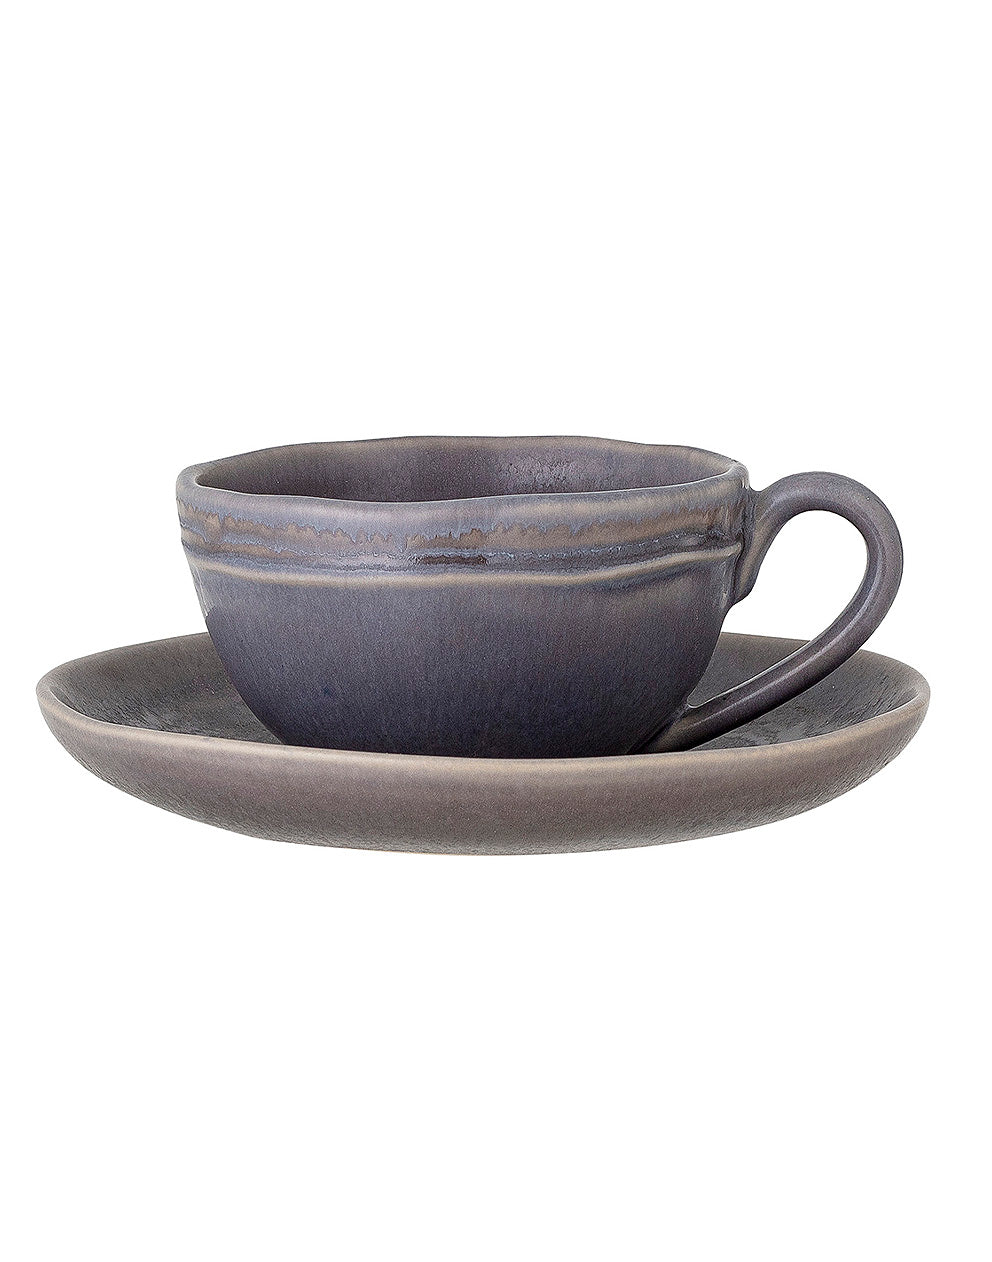 Set of 2 Cup and Saucer in Grey Stoneware